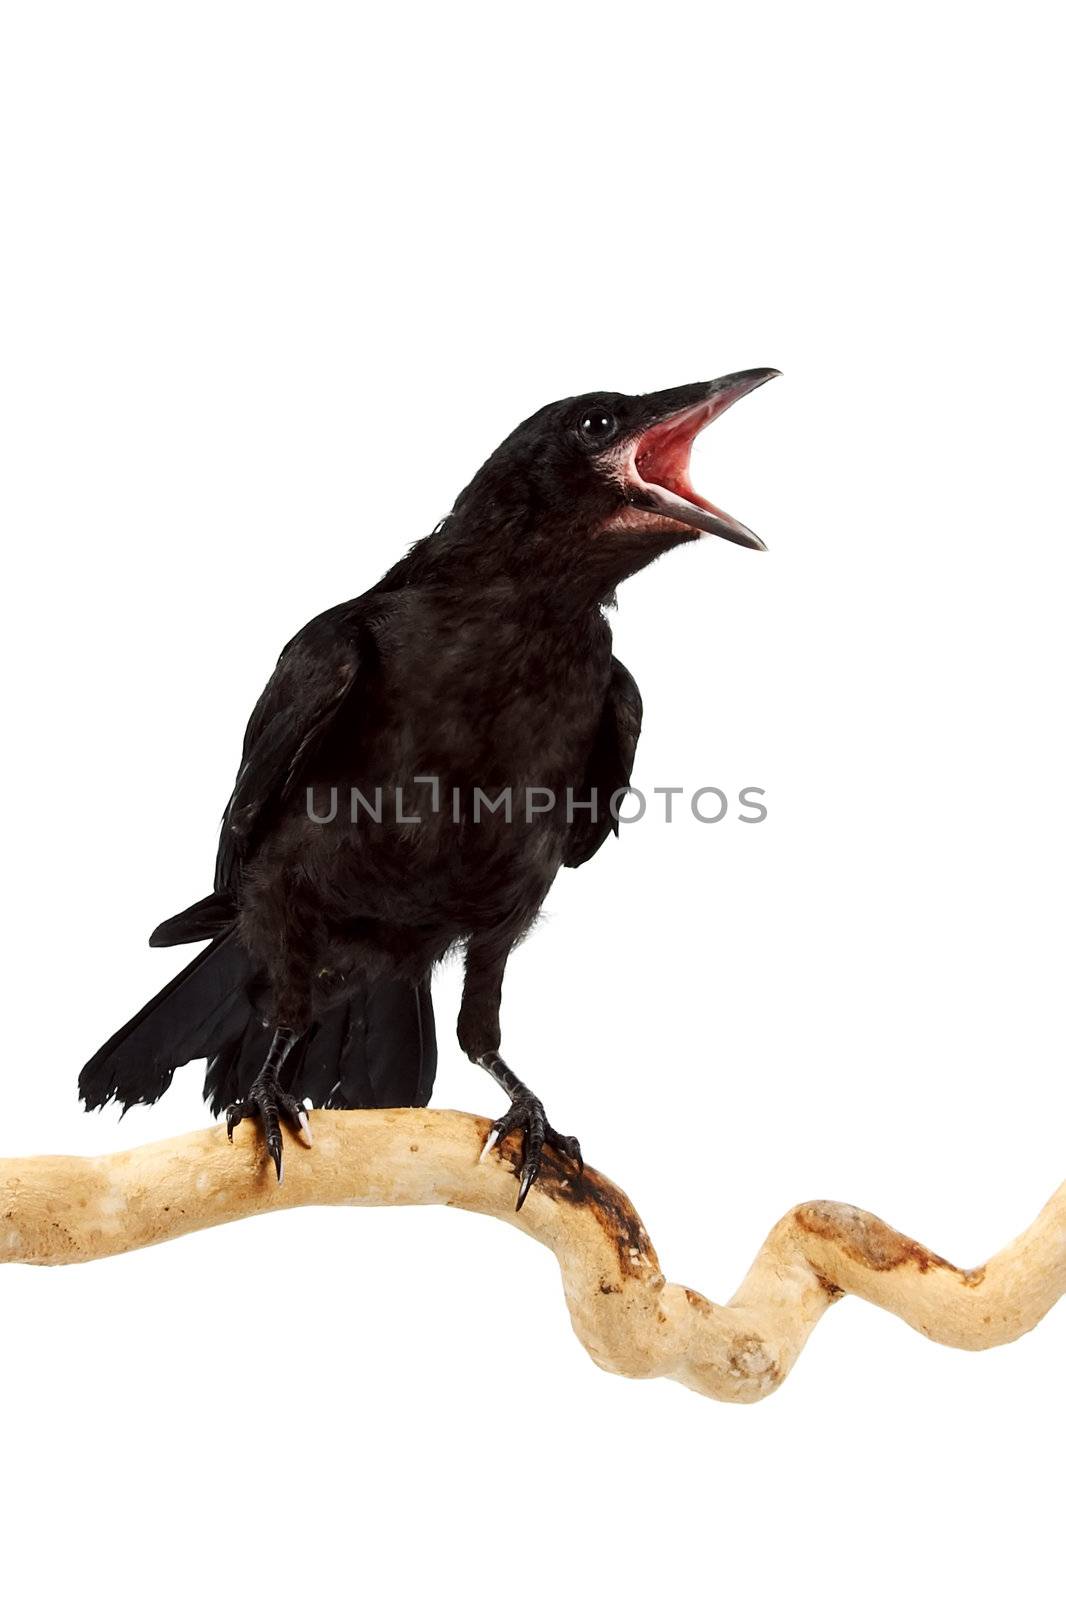 The bird a rook sits on a branch on a white background